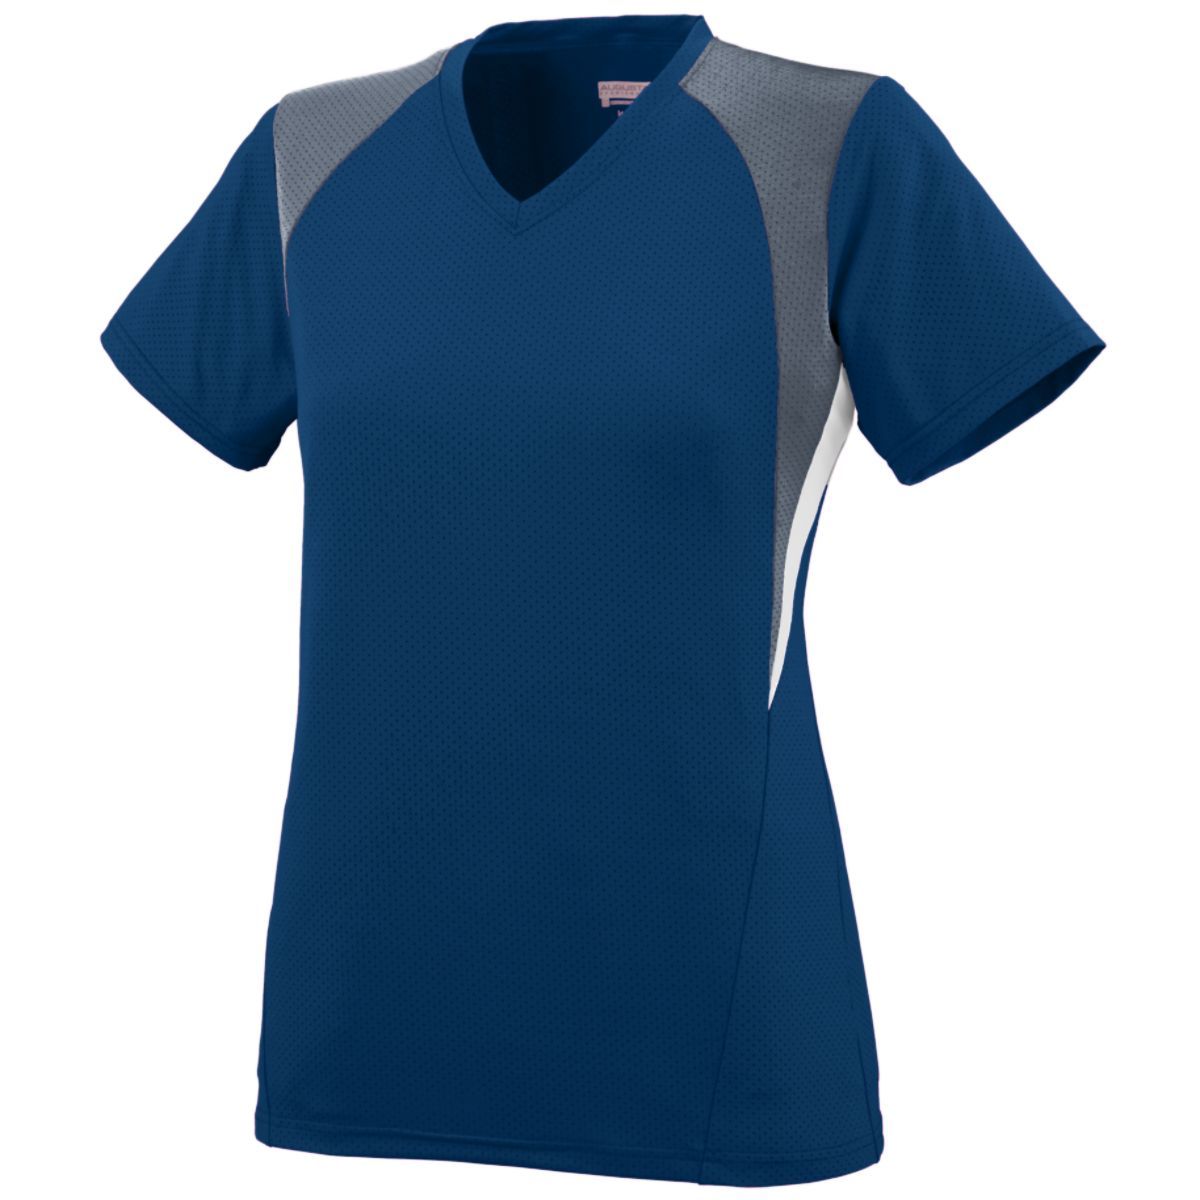 Augusta Sportswear Ladies Mystic Jersey in Navy/Graphite/White  -Part of the Ladies, Ladies-Jersey, Augusta-Products, Soccer, Shirts, All-Sports-1 product lines at KanaleyCreations.com